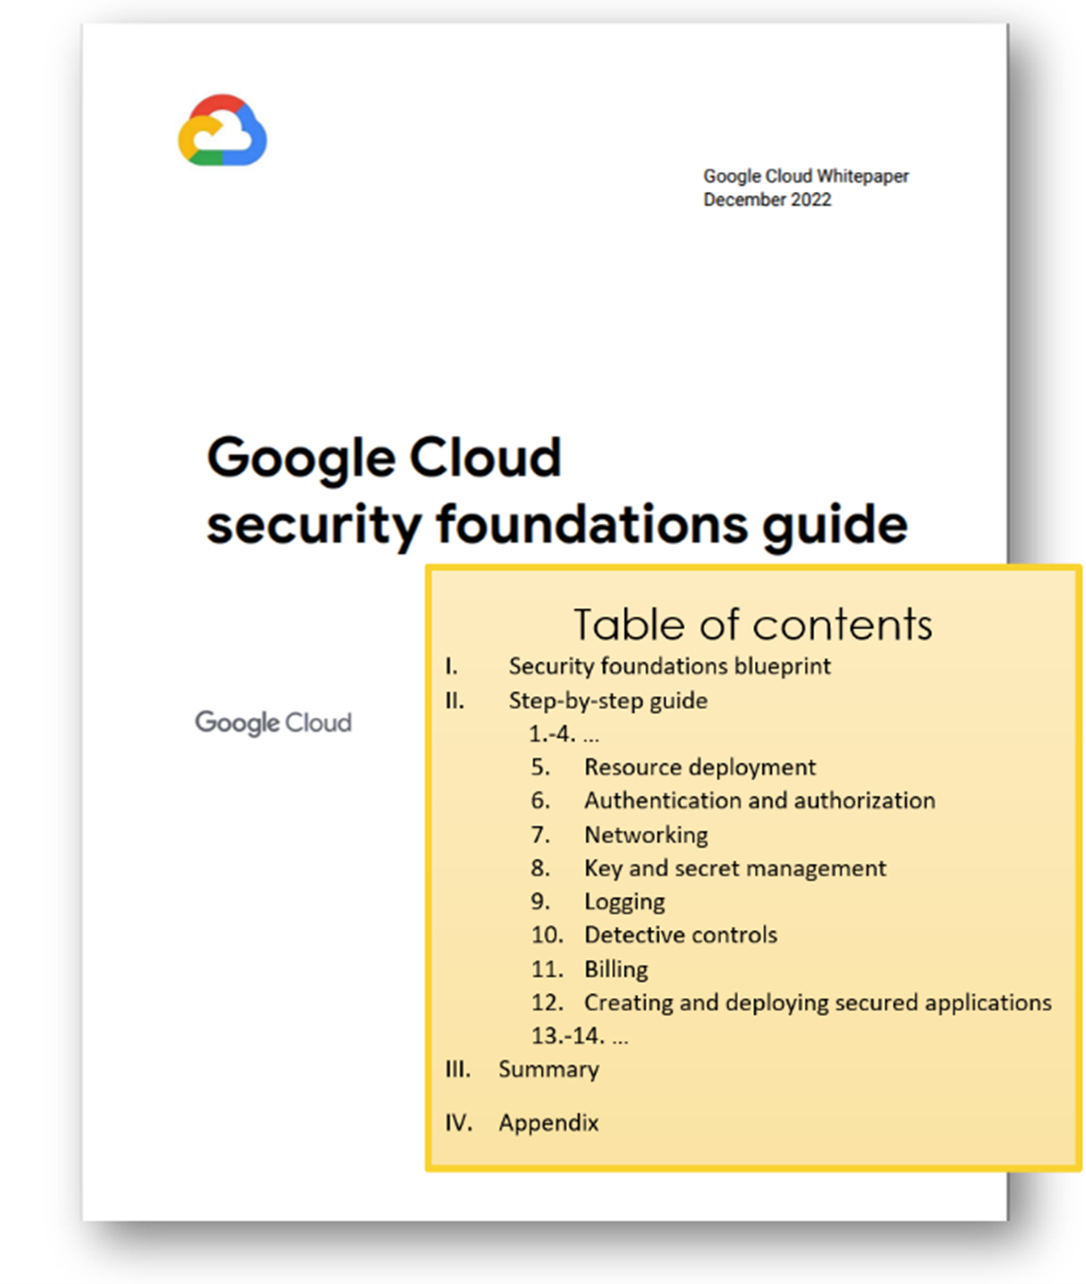 Google Cloud security foundation guideline extract